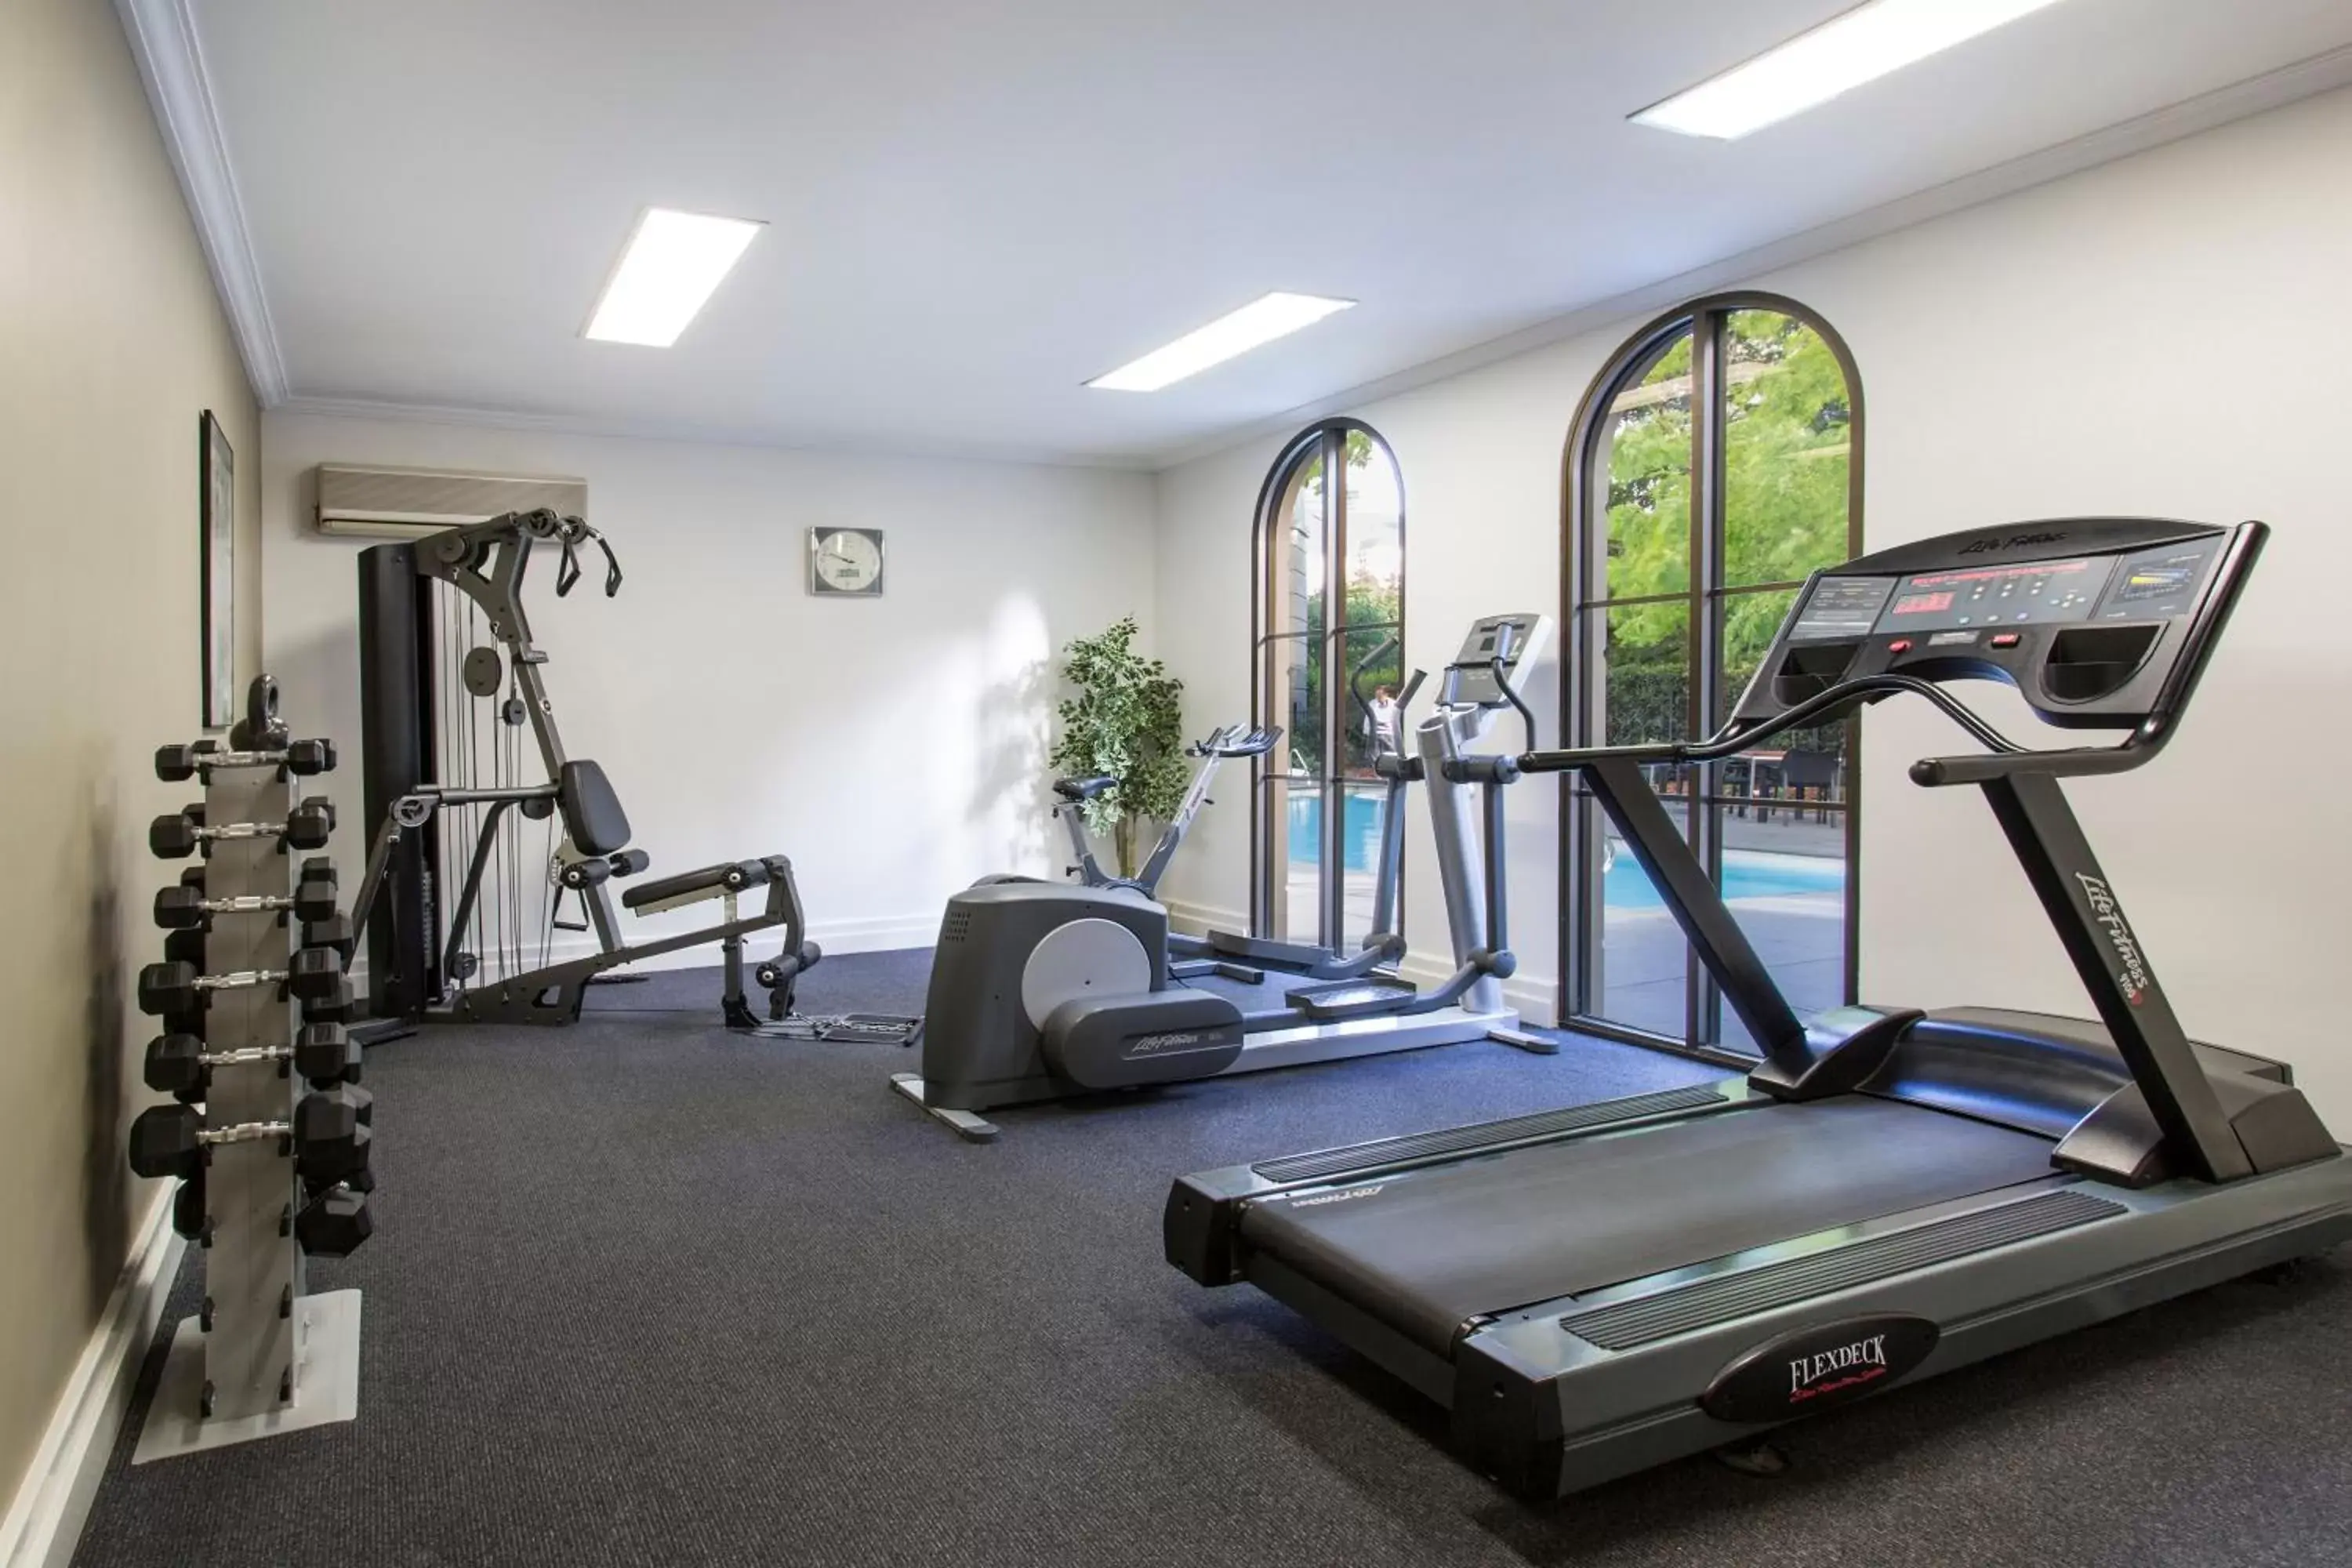 Fitness centre/facilities, Fitness Center/Facilities in Mantra on Jolimont